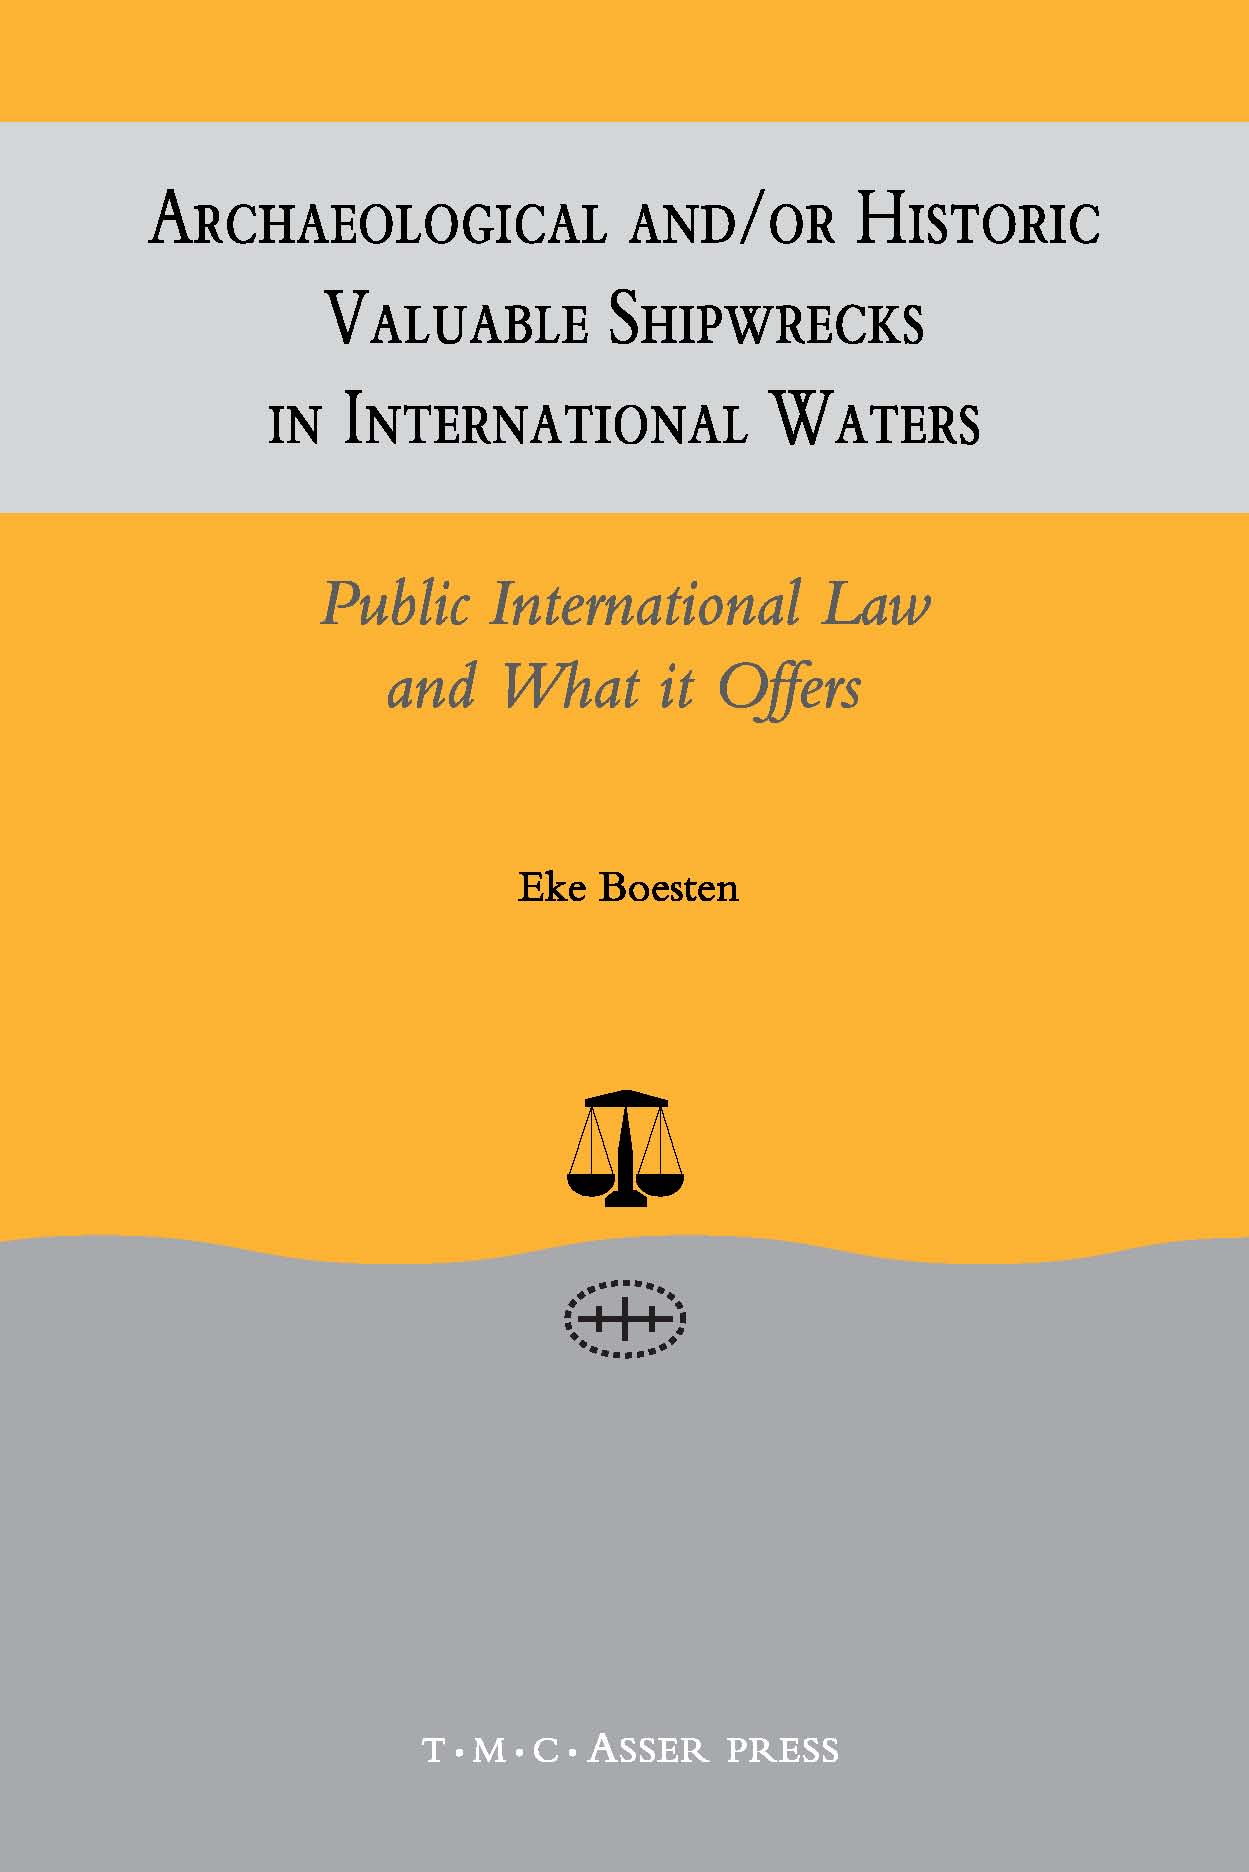 Archaeological and/or Historic Valuable Shipwrecks in International Waters - Public International Law and What it Offers